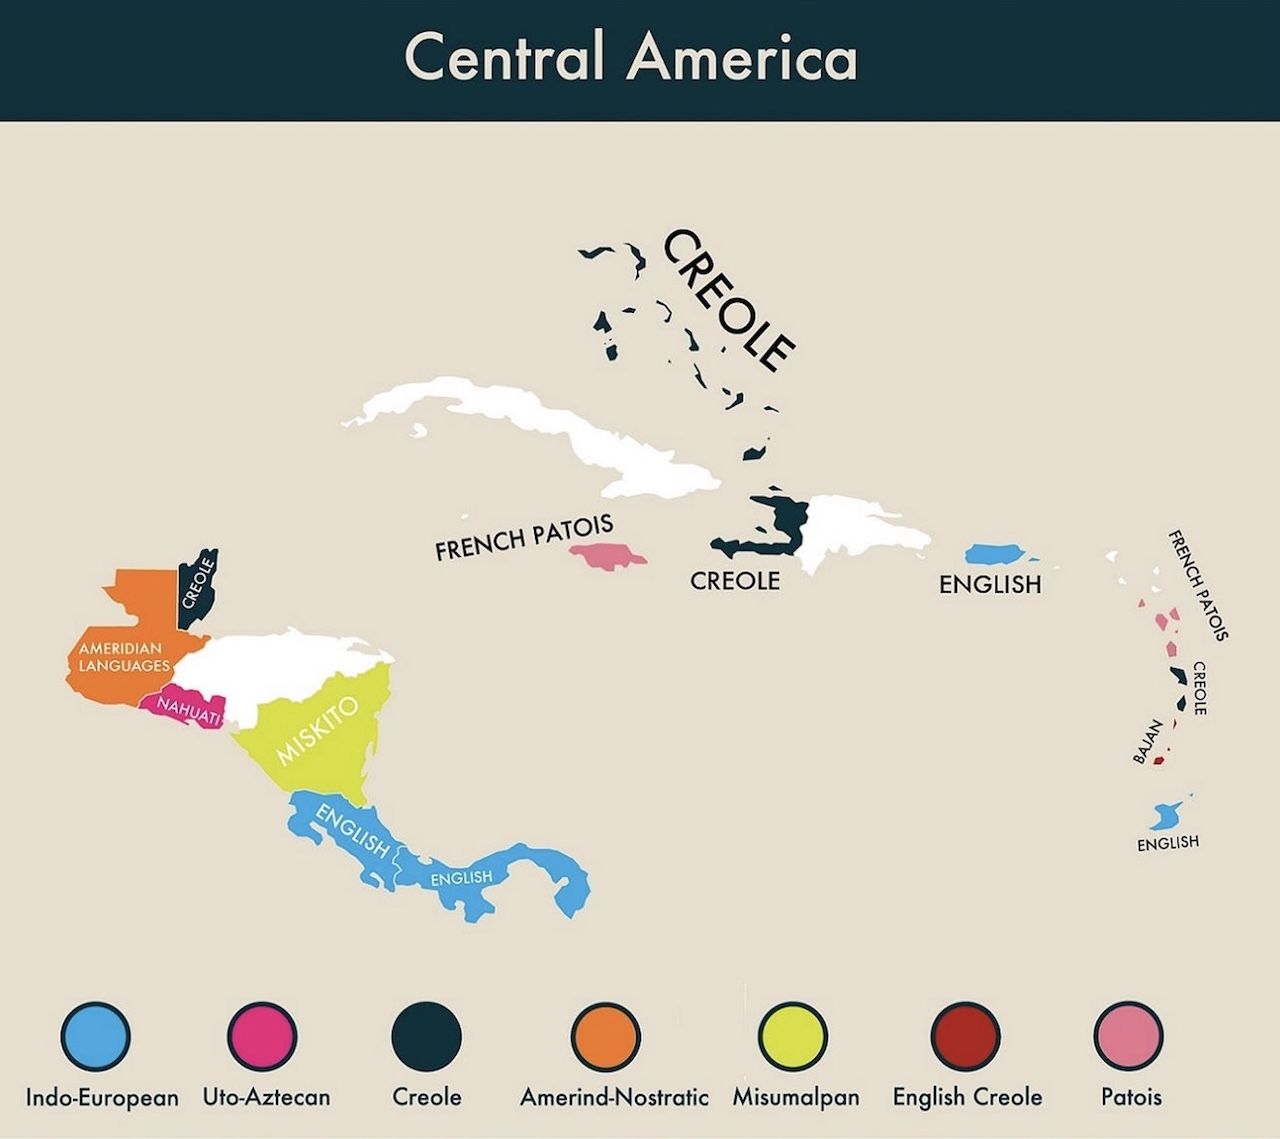 Central America most commonly spoken second language